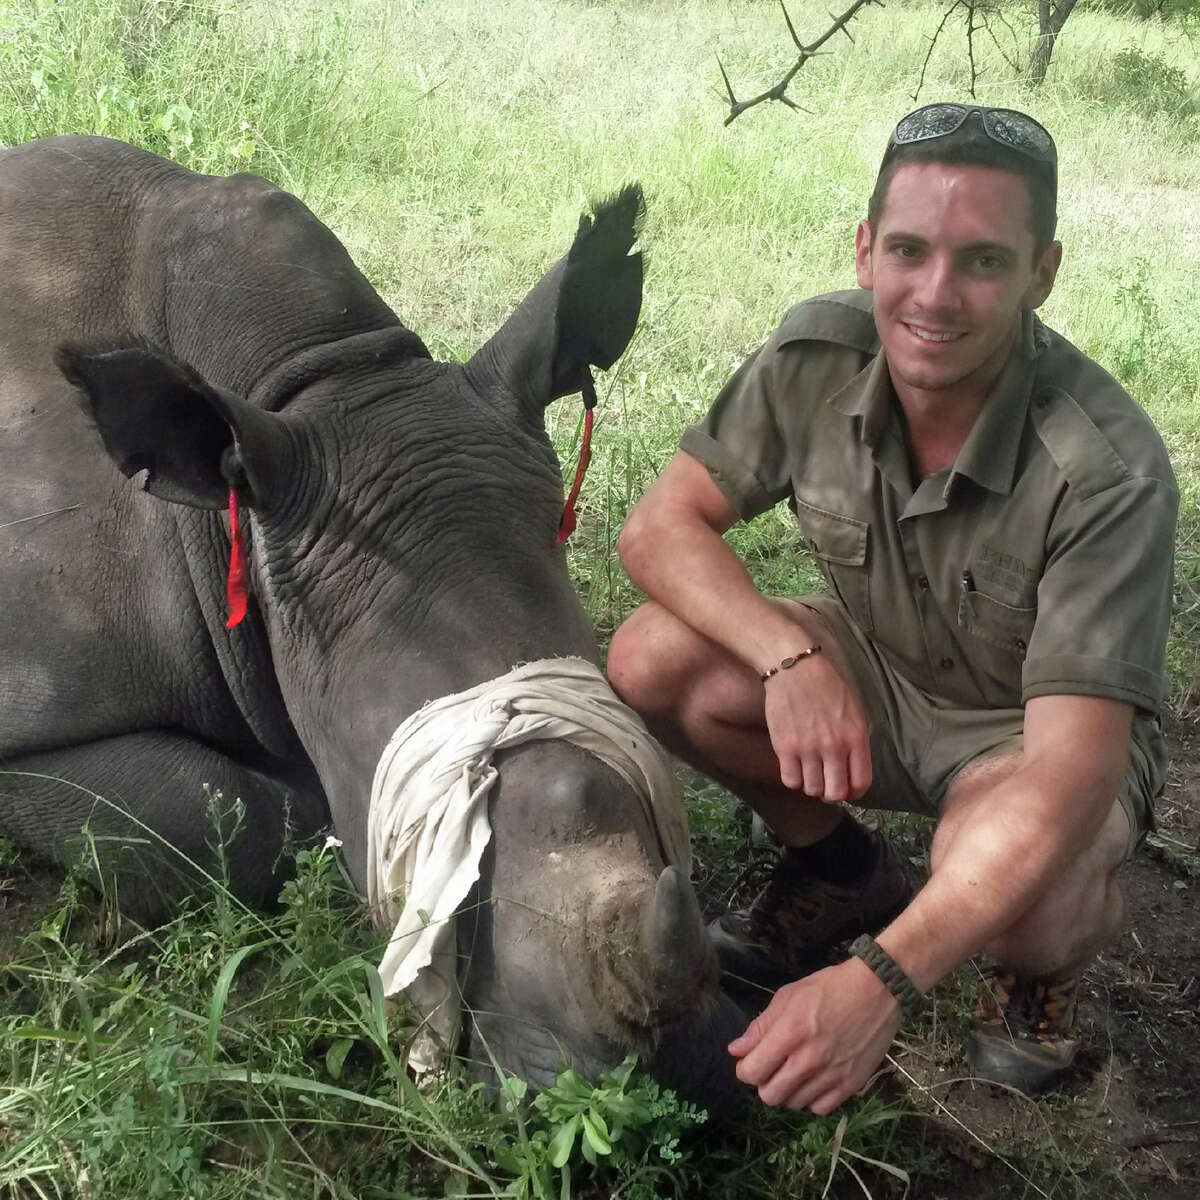 Greenwich native Axel Hunnicutt poses with an 18-month-old white rhino after placing microchips in his horns.